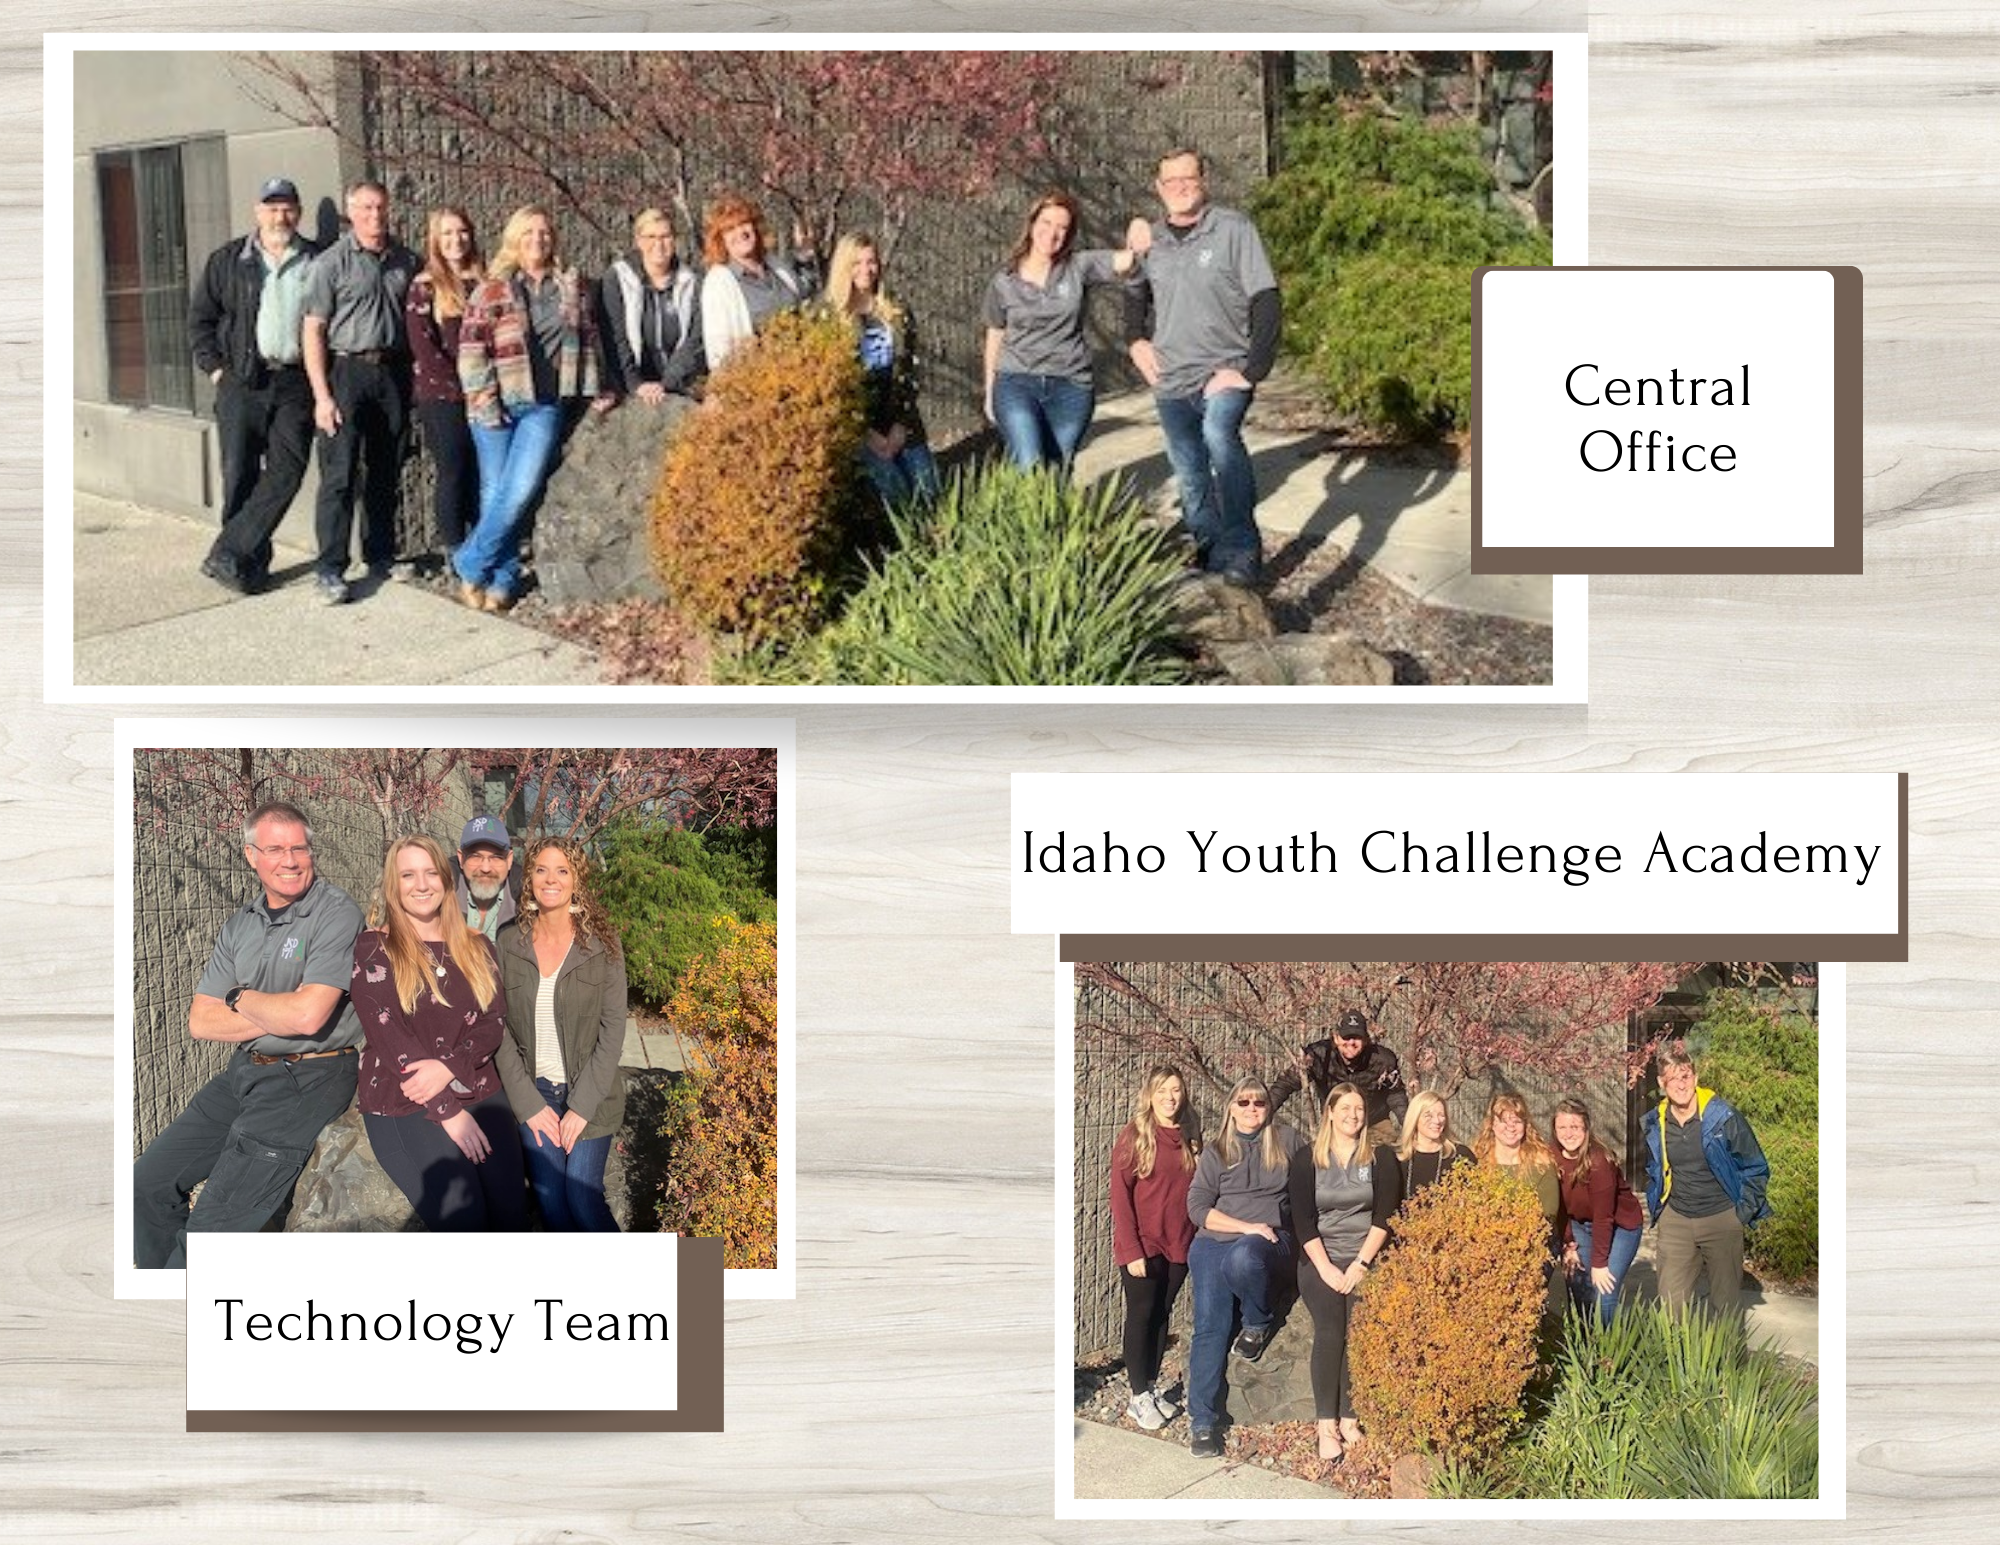 Central Office, Technology Team, Idaho Youth Challenge Academy